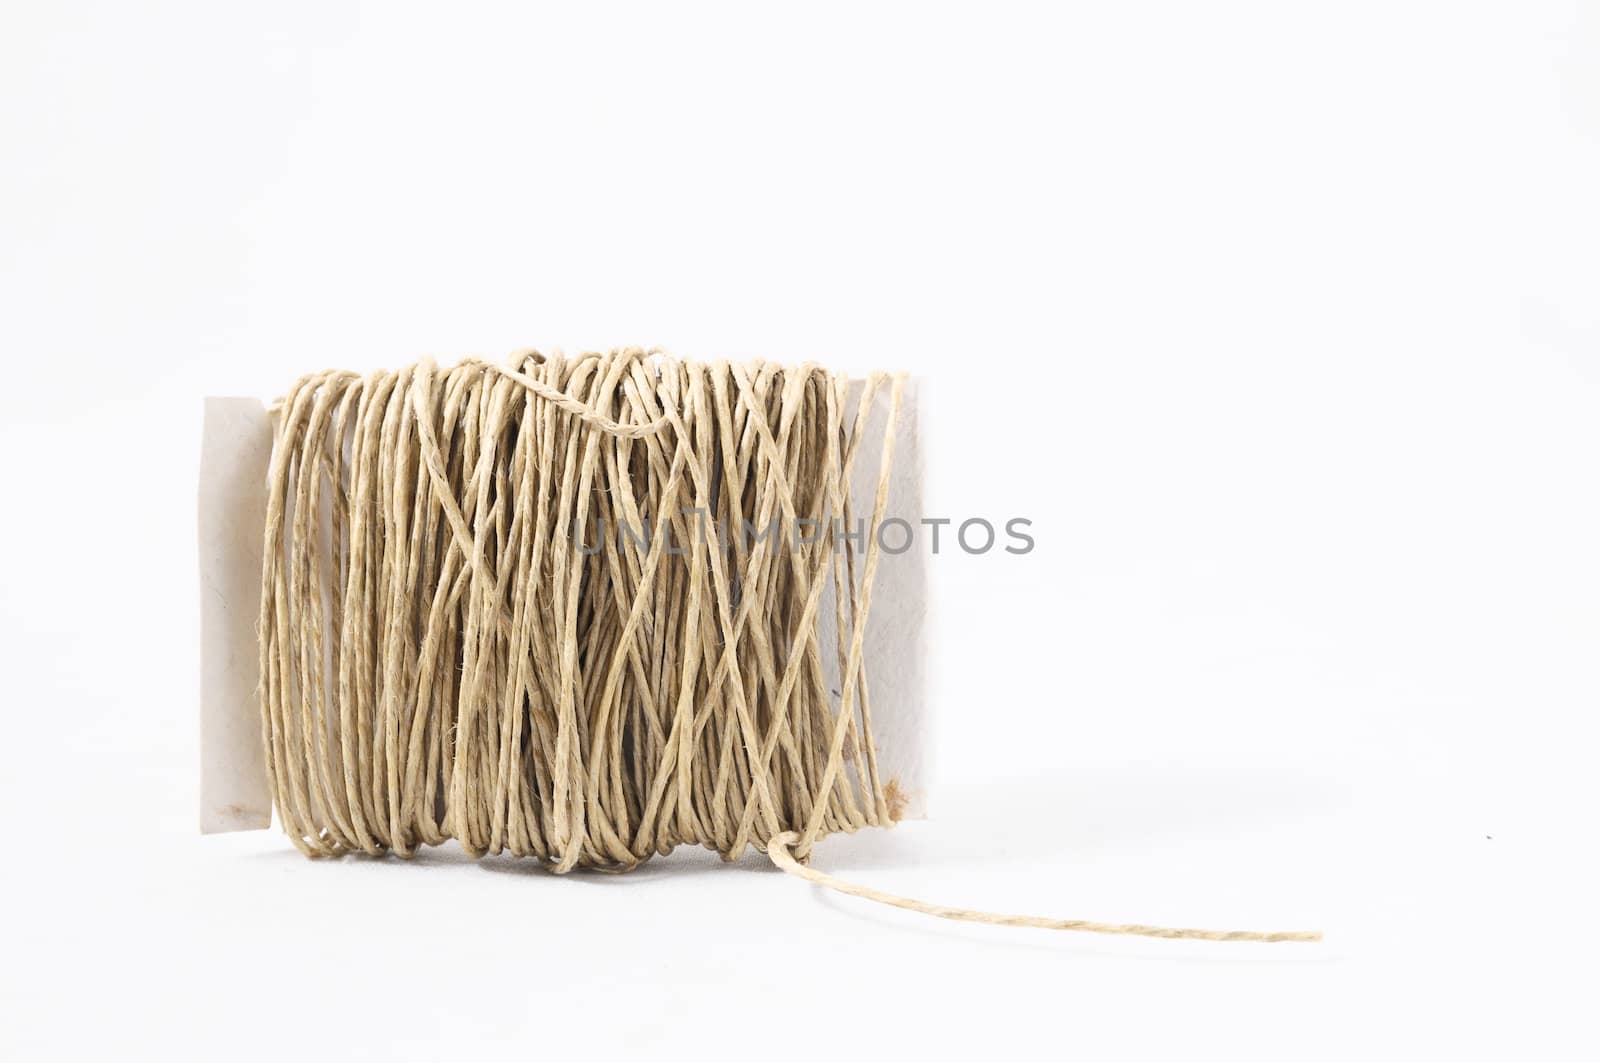 Roll of Twine isolated on a White Background